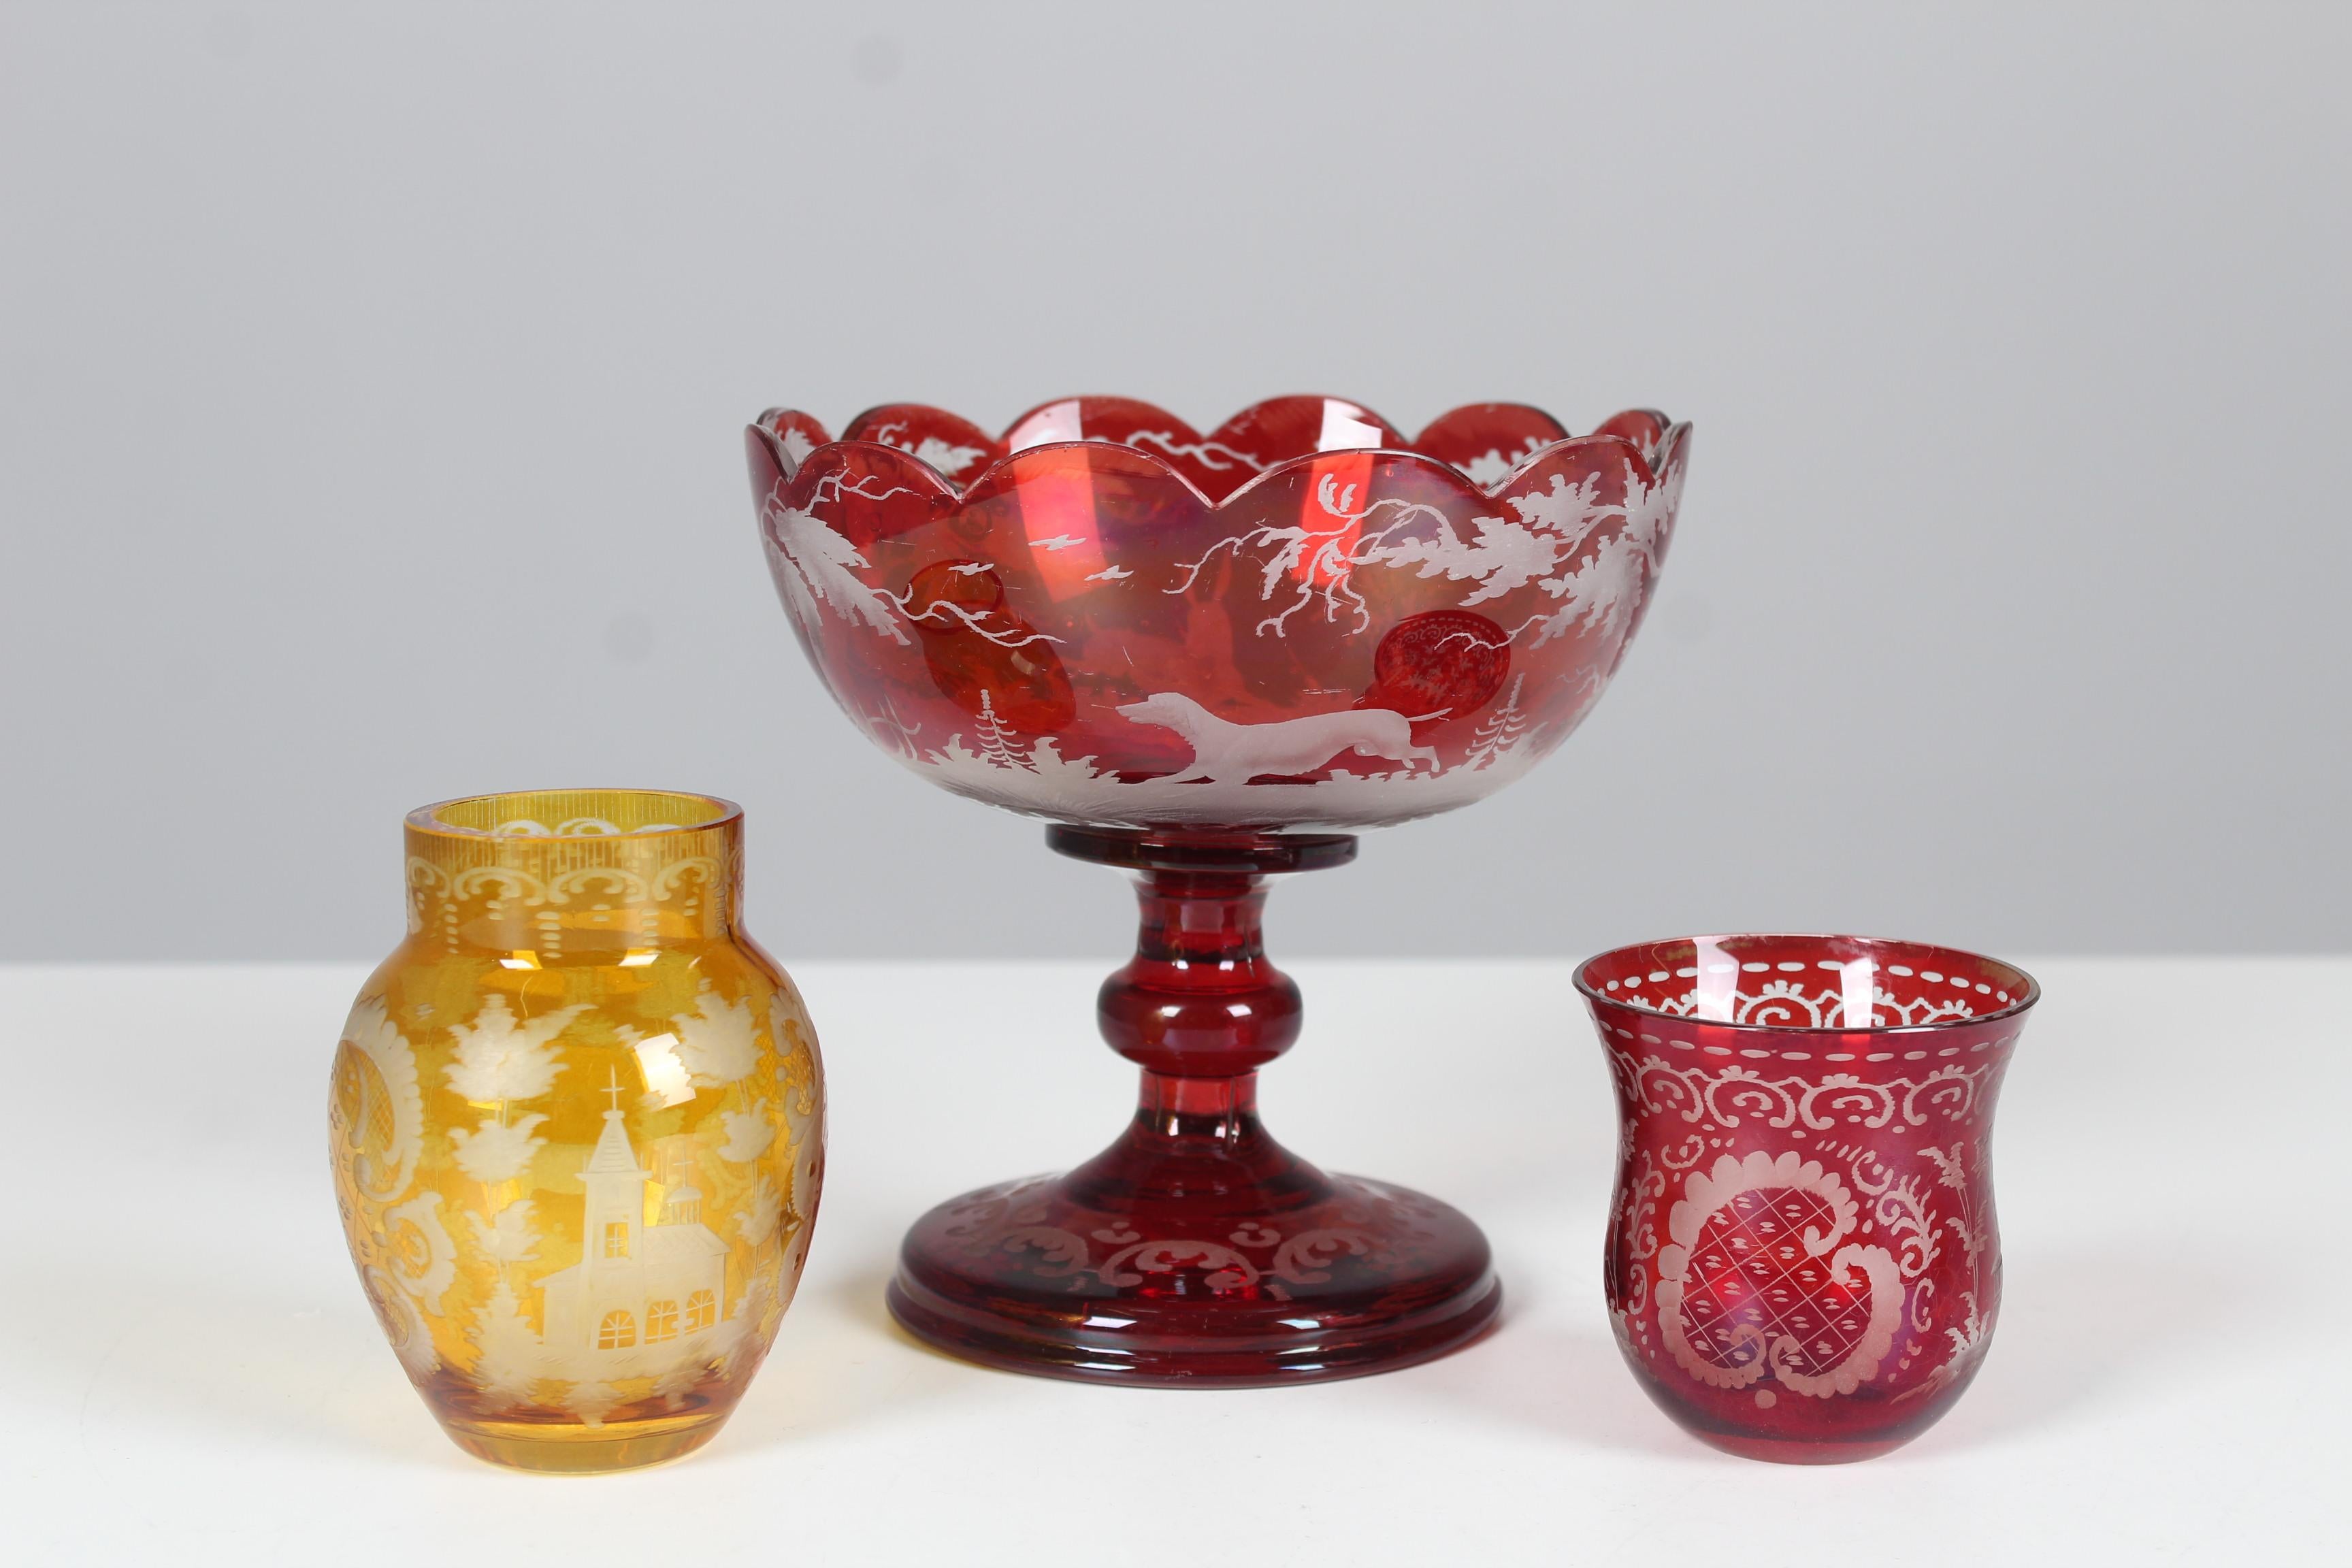 Antique Bohemian Glass Set, circa 1880, Bohemian Crystal, Ruby Red and Yellow For Sale 3